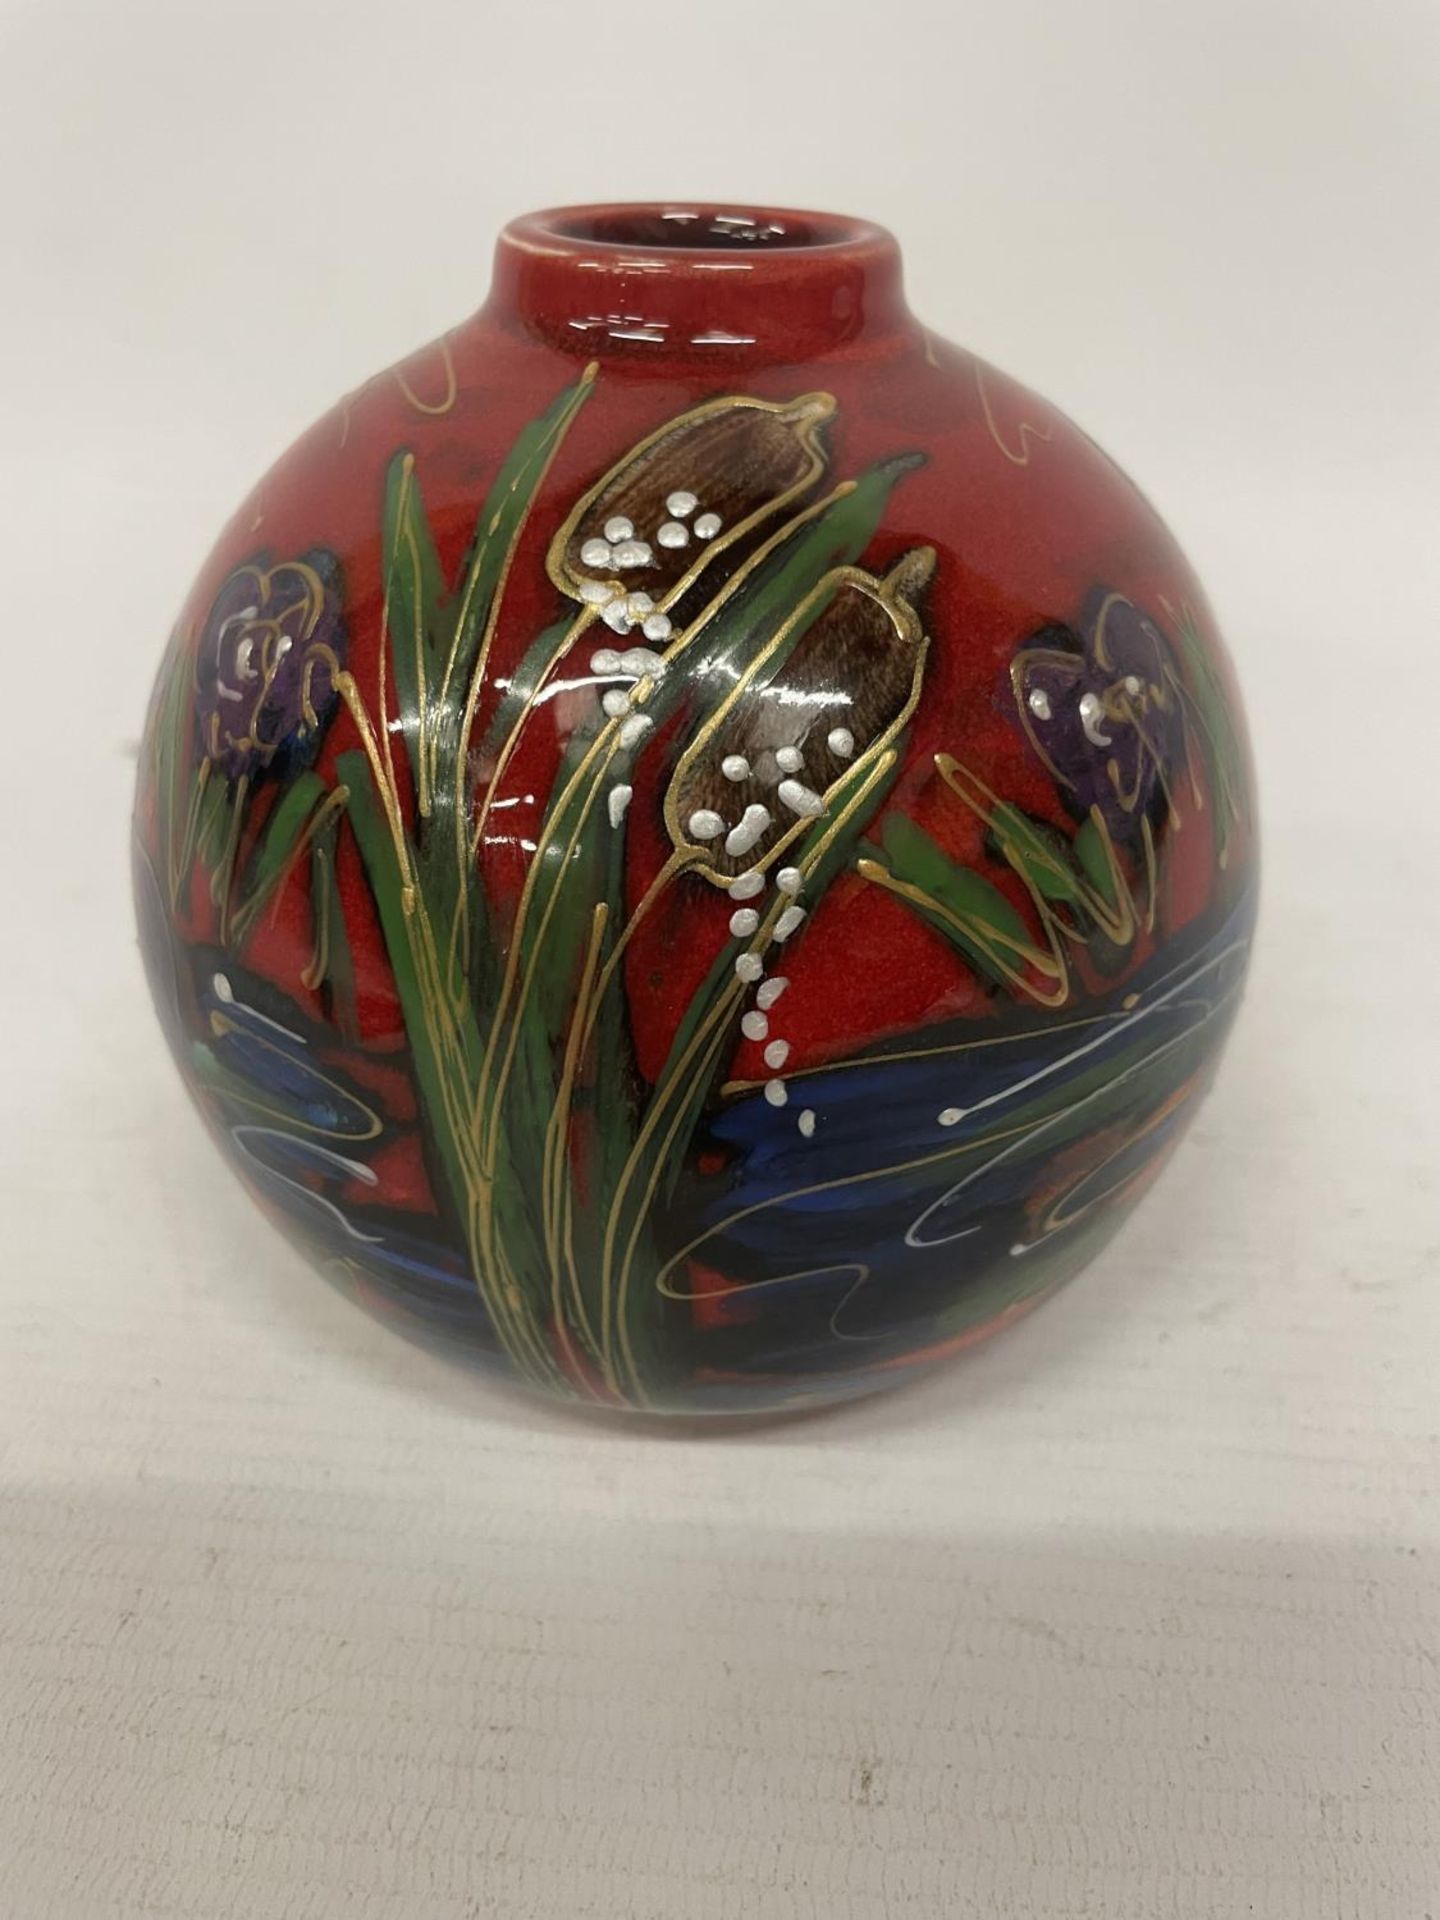 AN ANITA HARRIS KINGFISHER VASE HANDPAINTED AND SIGNED IN GOLD - Image 2 of 3